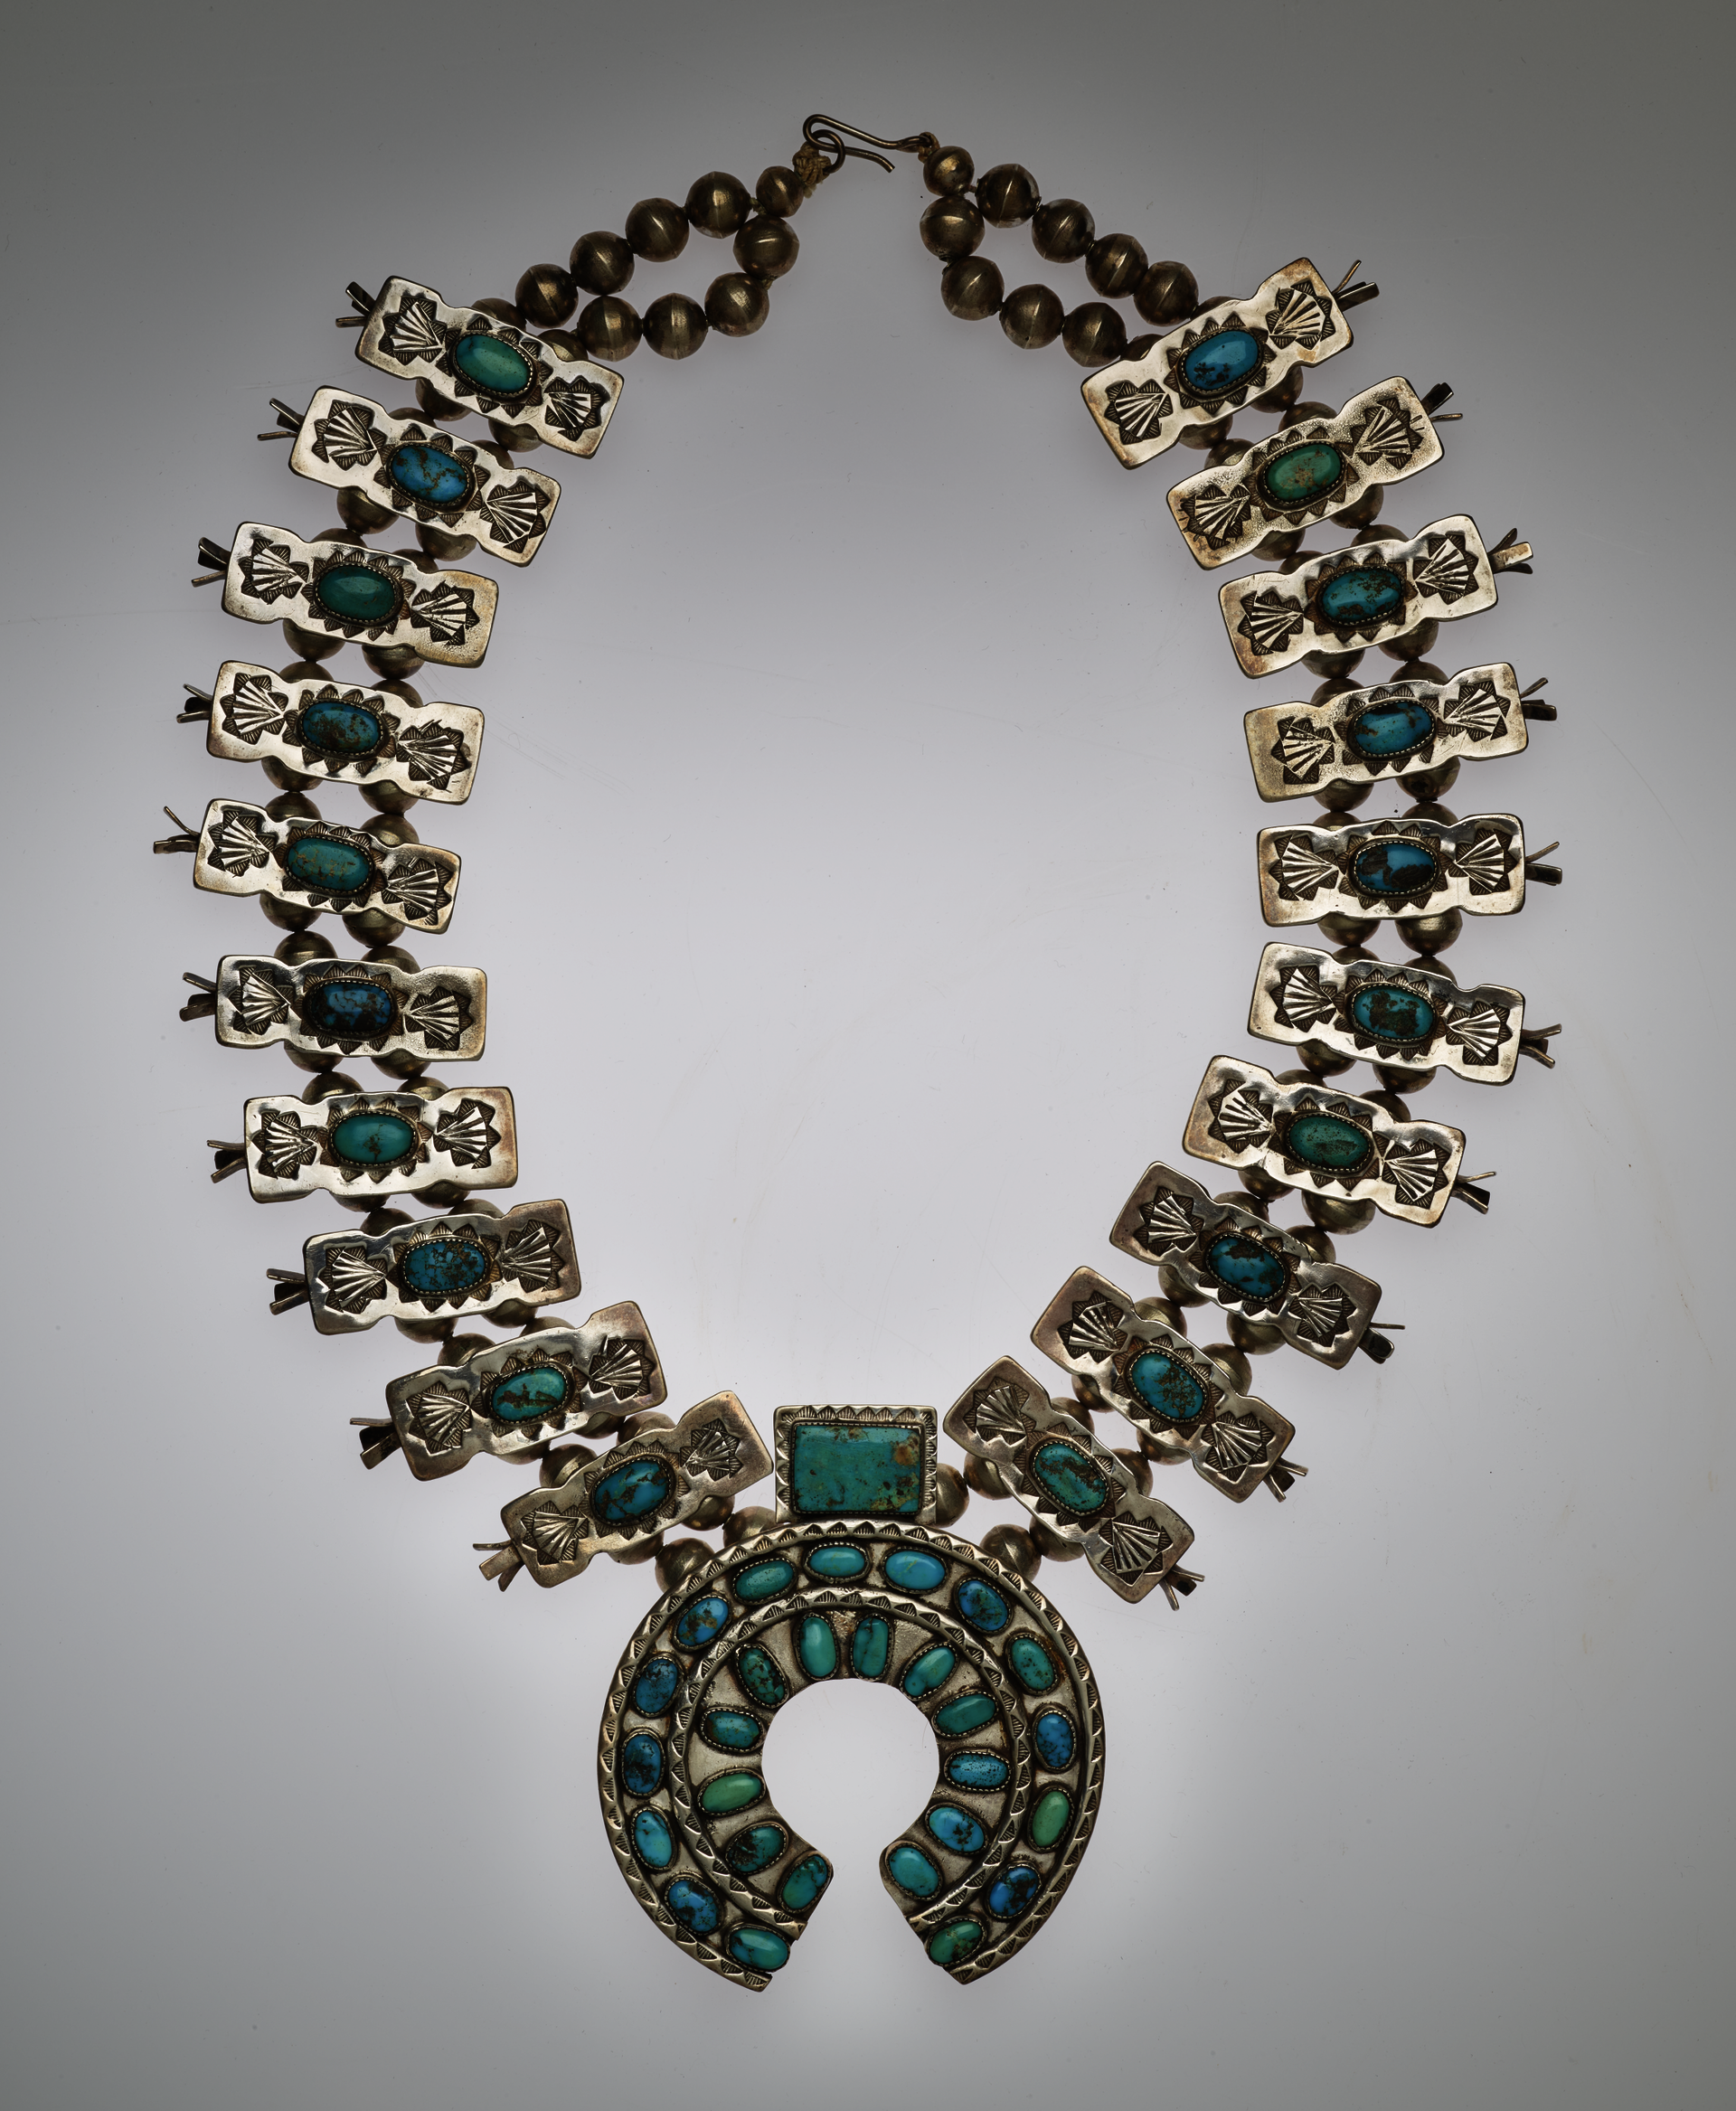 Silver and turquoise necklace. The chain features turquoise stones set within silver rectangular ornaments threaded into two rows of beaded chains. The central pendant is a turquoise stone-set horseshoe shape. 